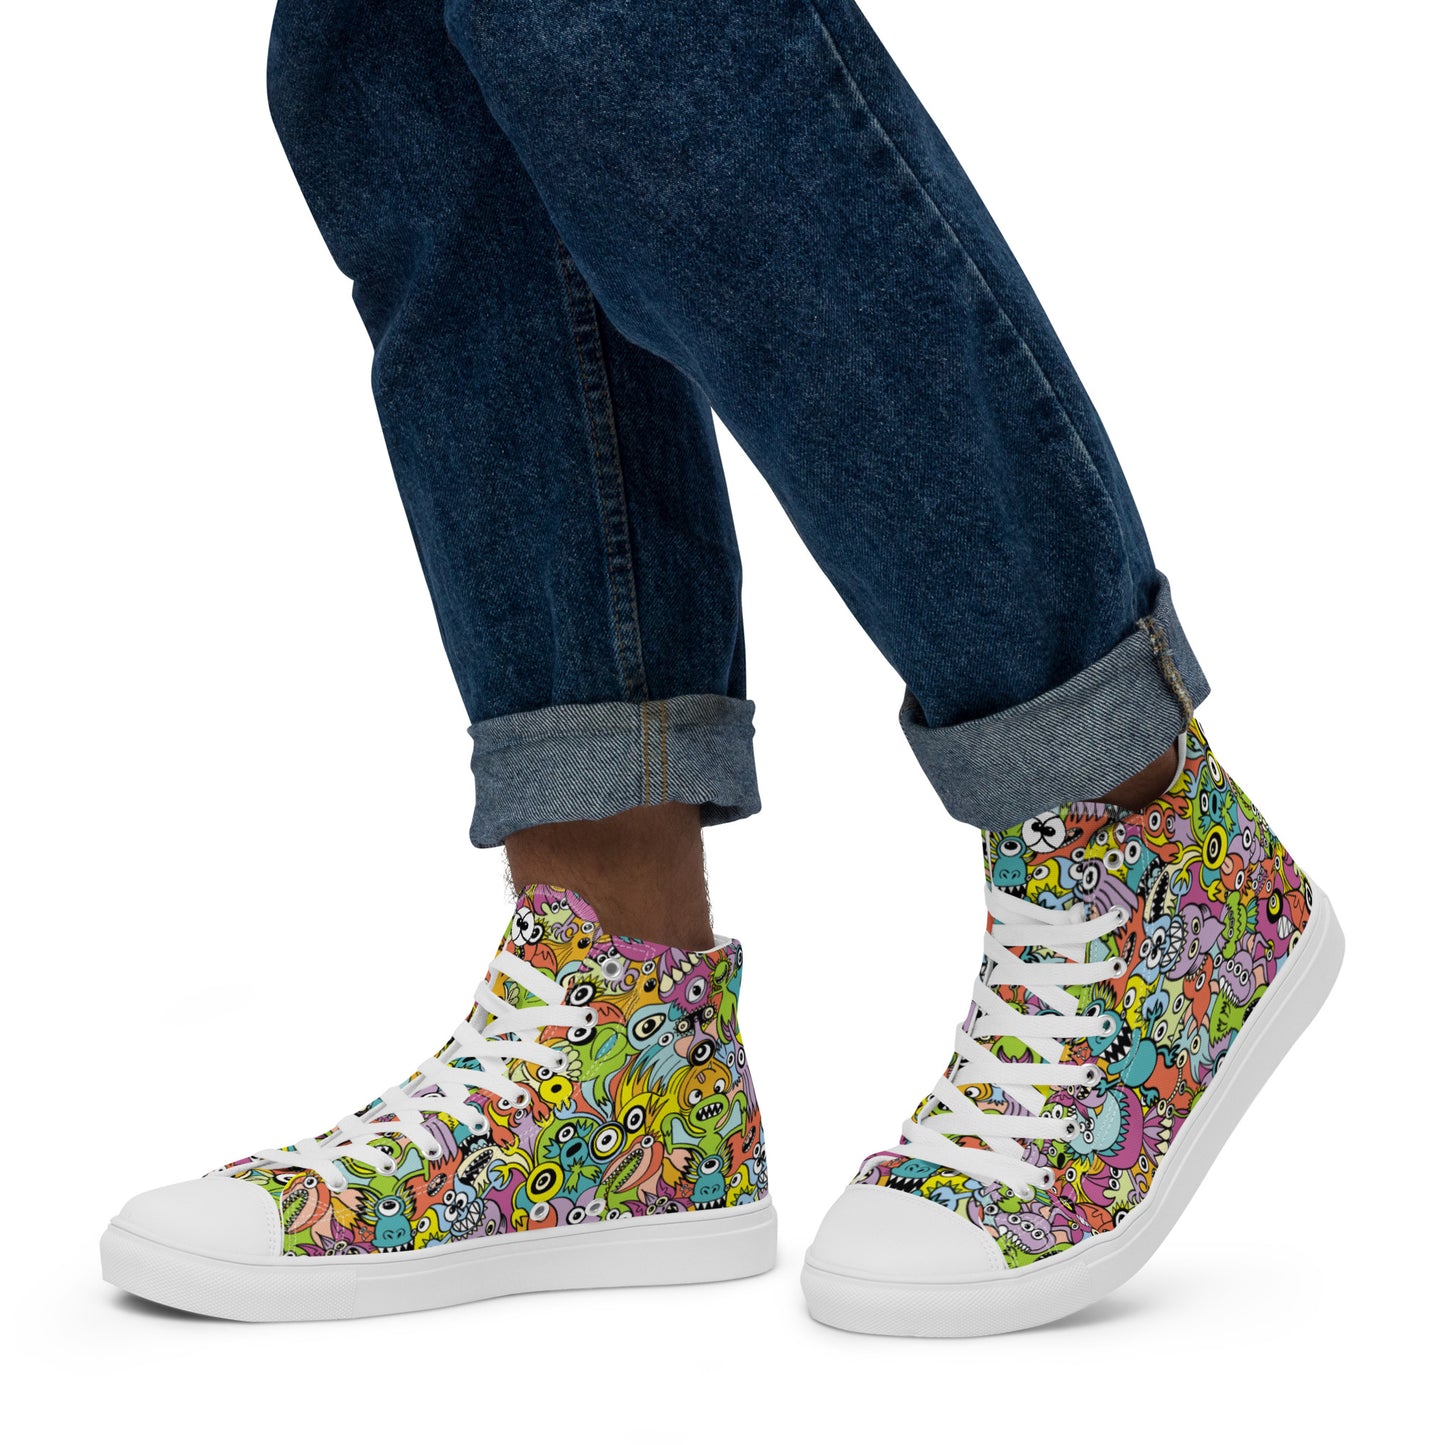 Funny monsters fighting for the best spot for a pattern design Men’s high top canvas shoes. Lifestyle